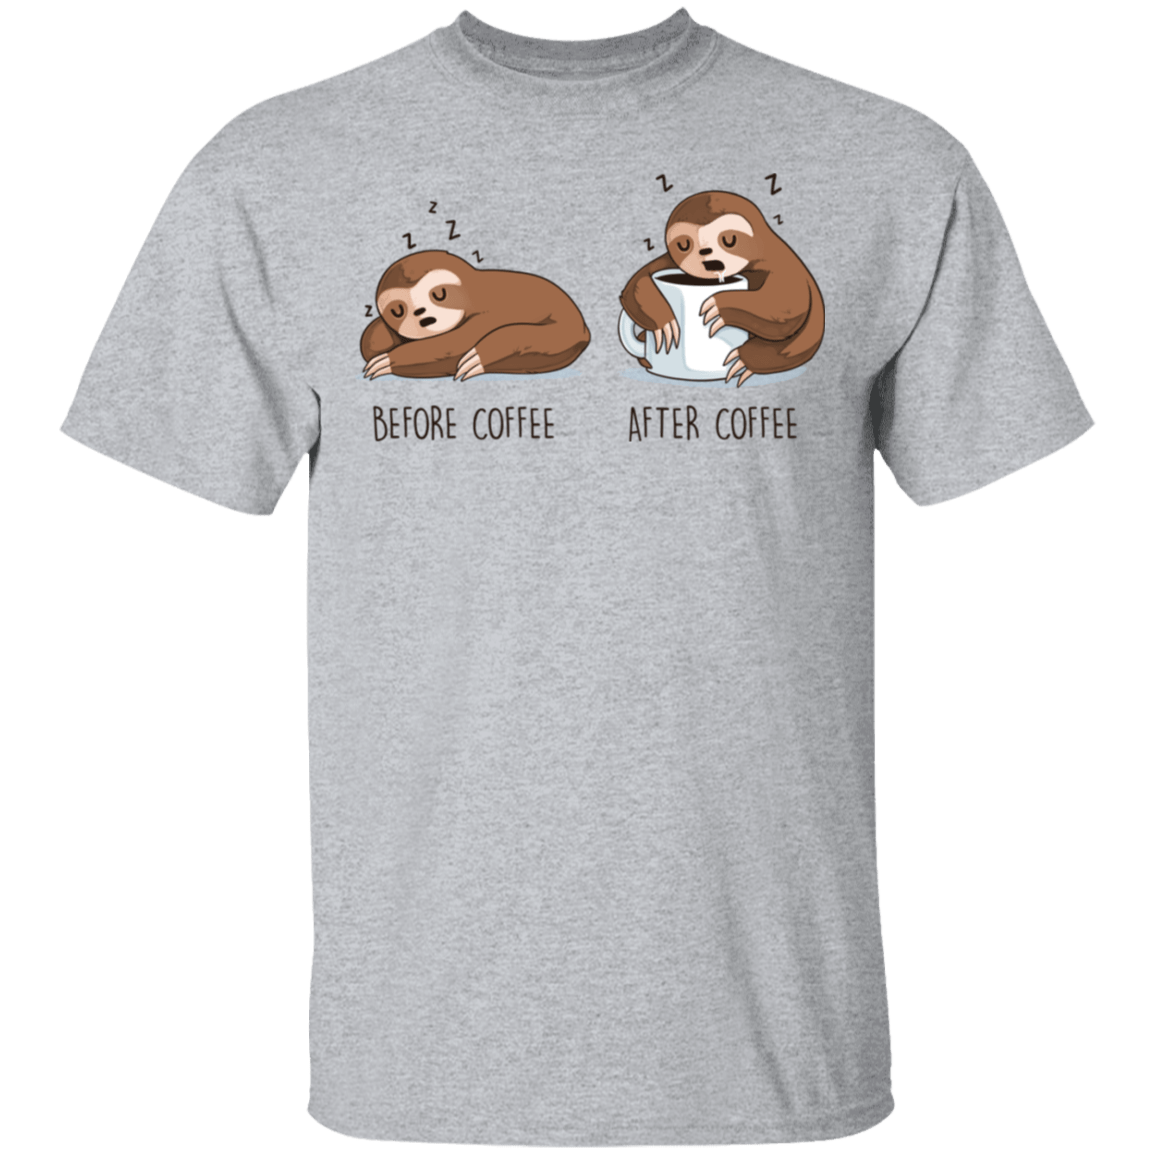 T-Shirts Sport Grey / S Before After Coffee Sloth T-Shirt